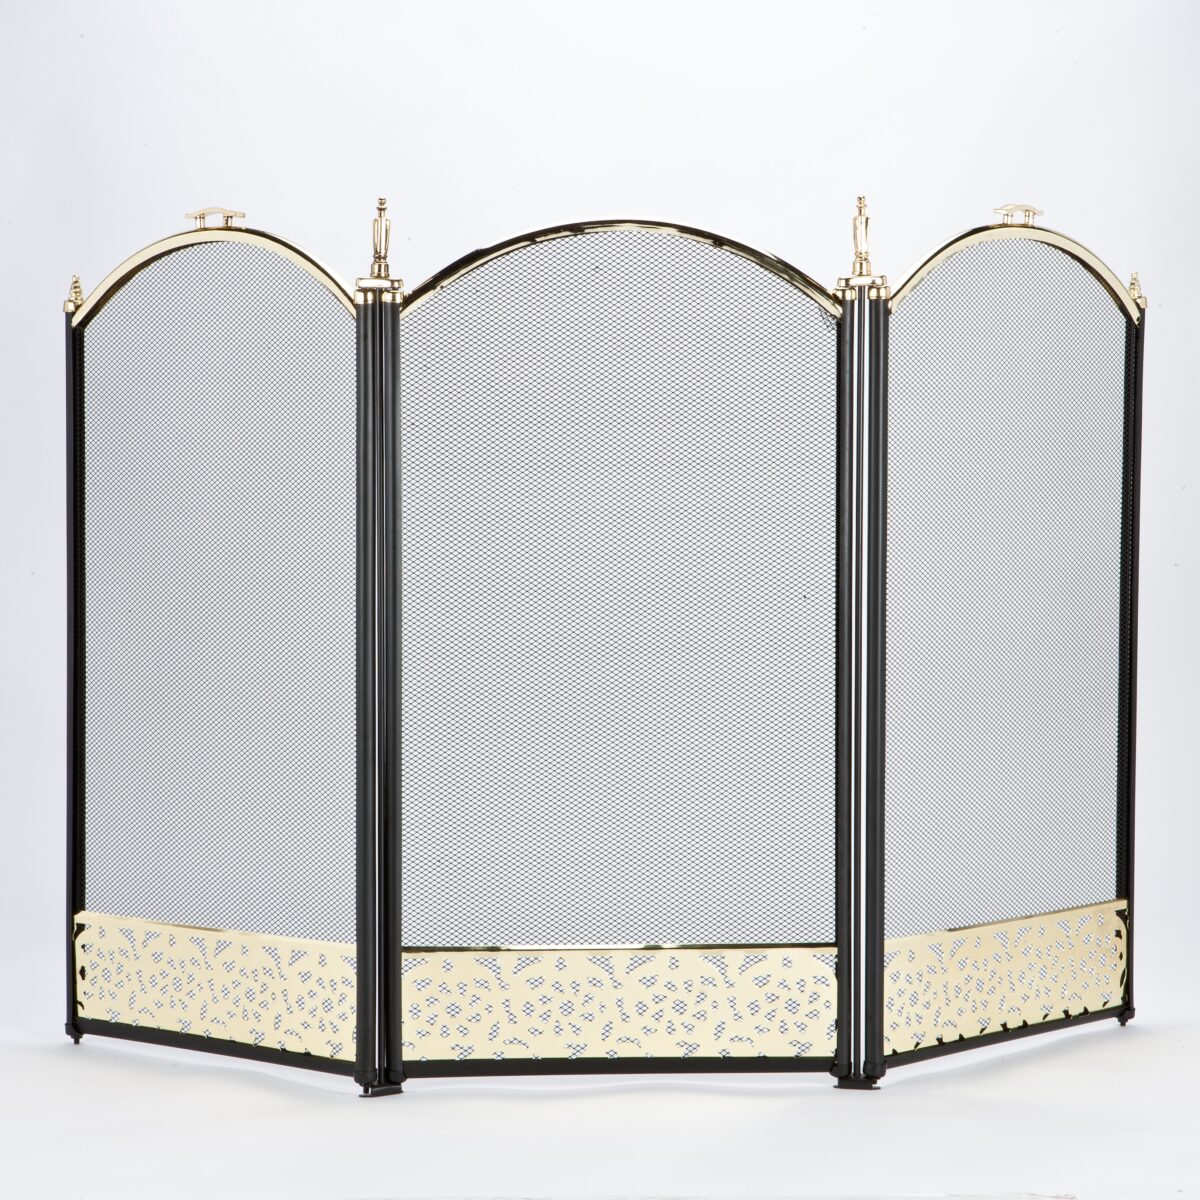 wholesale 3 Panel Black/Brass Screen With Filigree